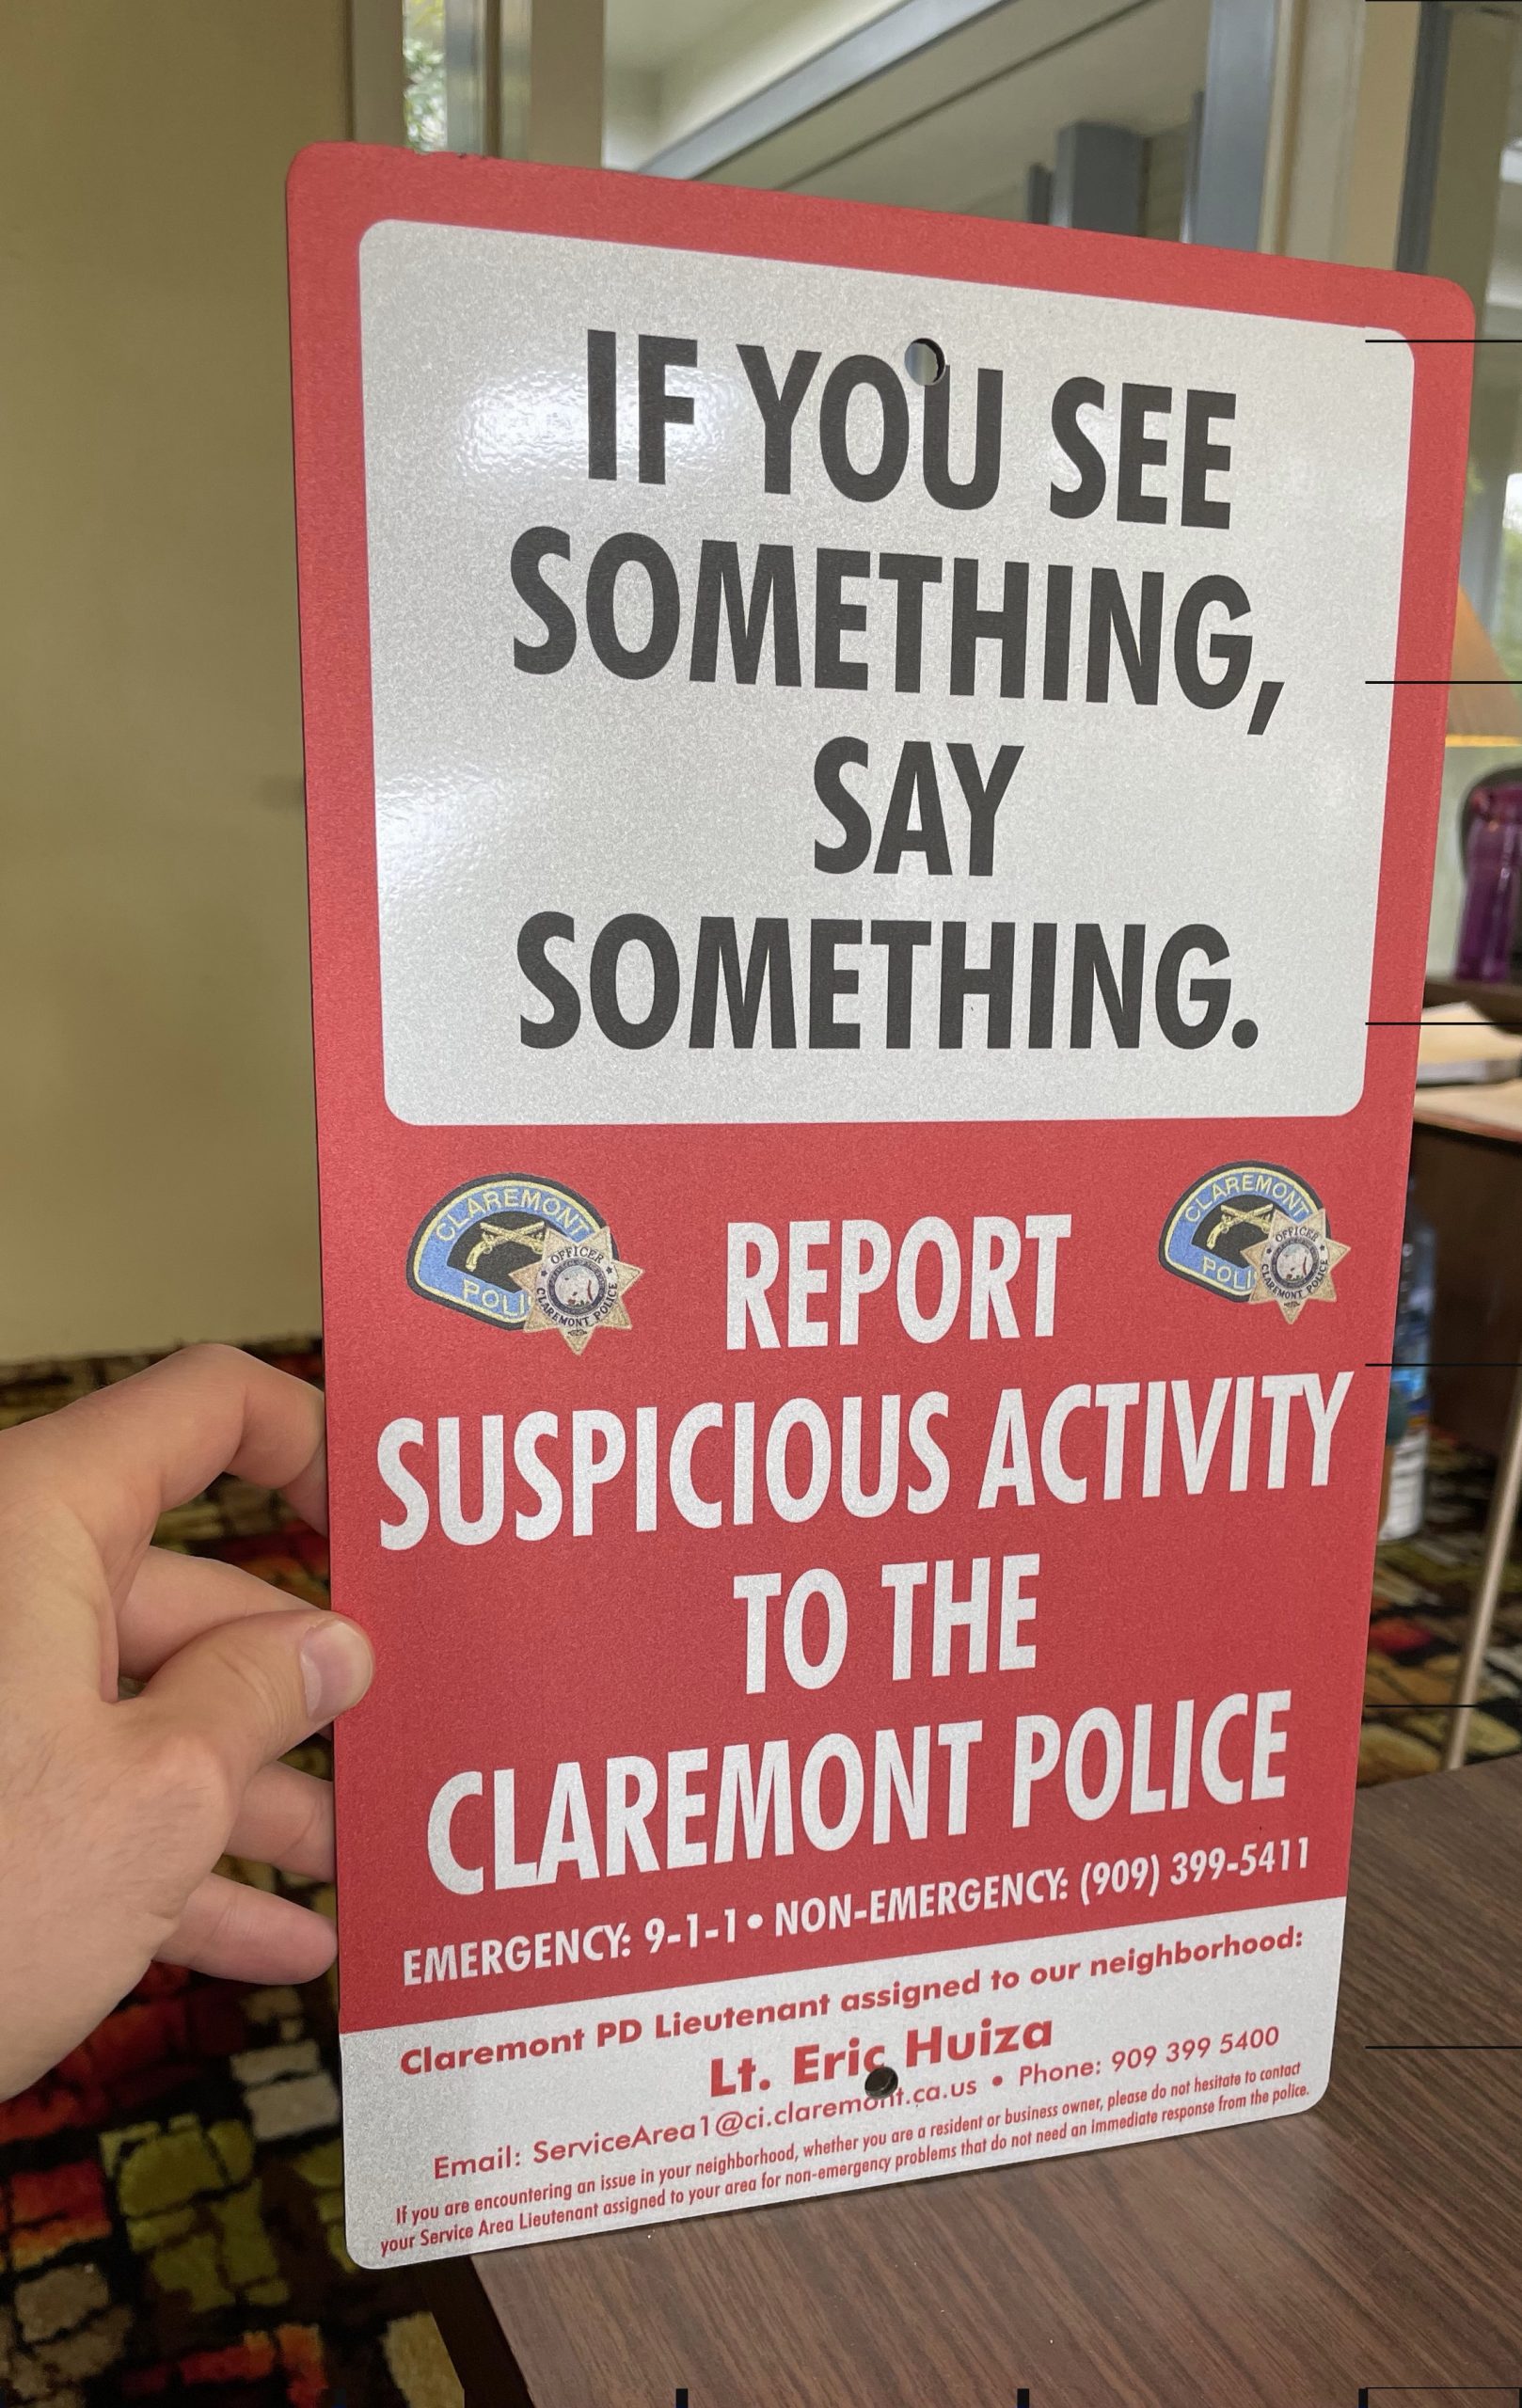 Parking lot signs for Claremont displaying the words "See Something Say Something." The public safety signs show the contact information of local authorities.